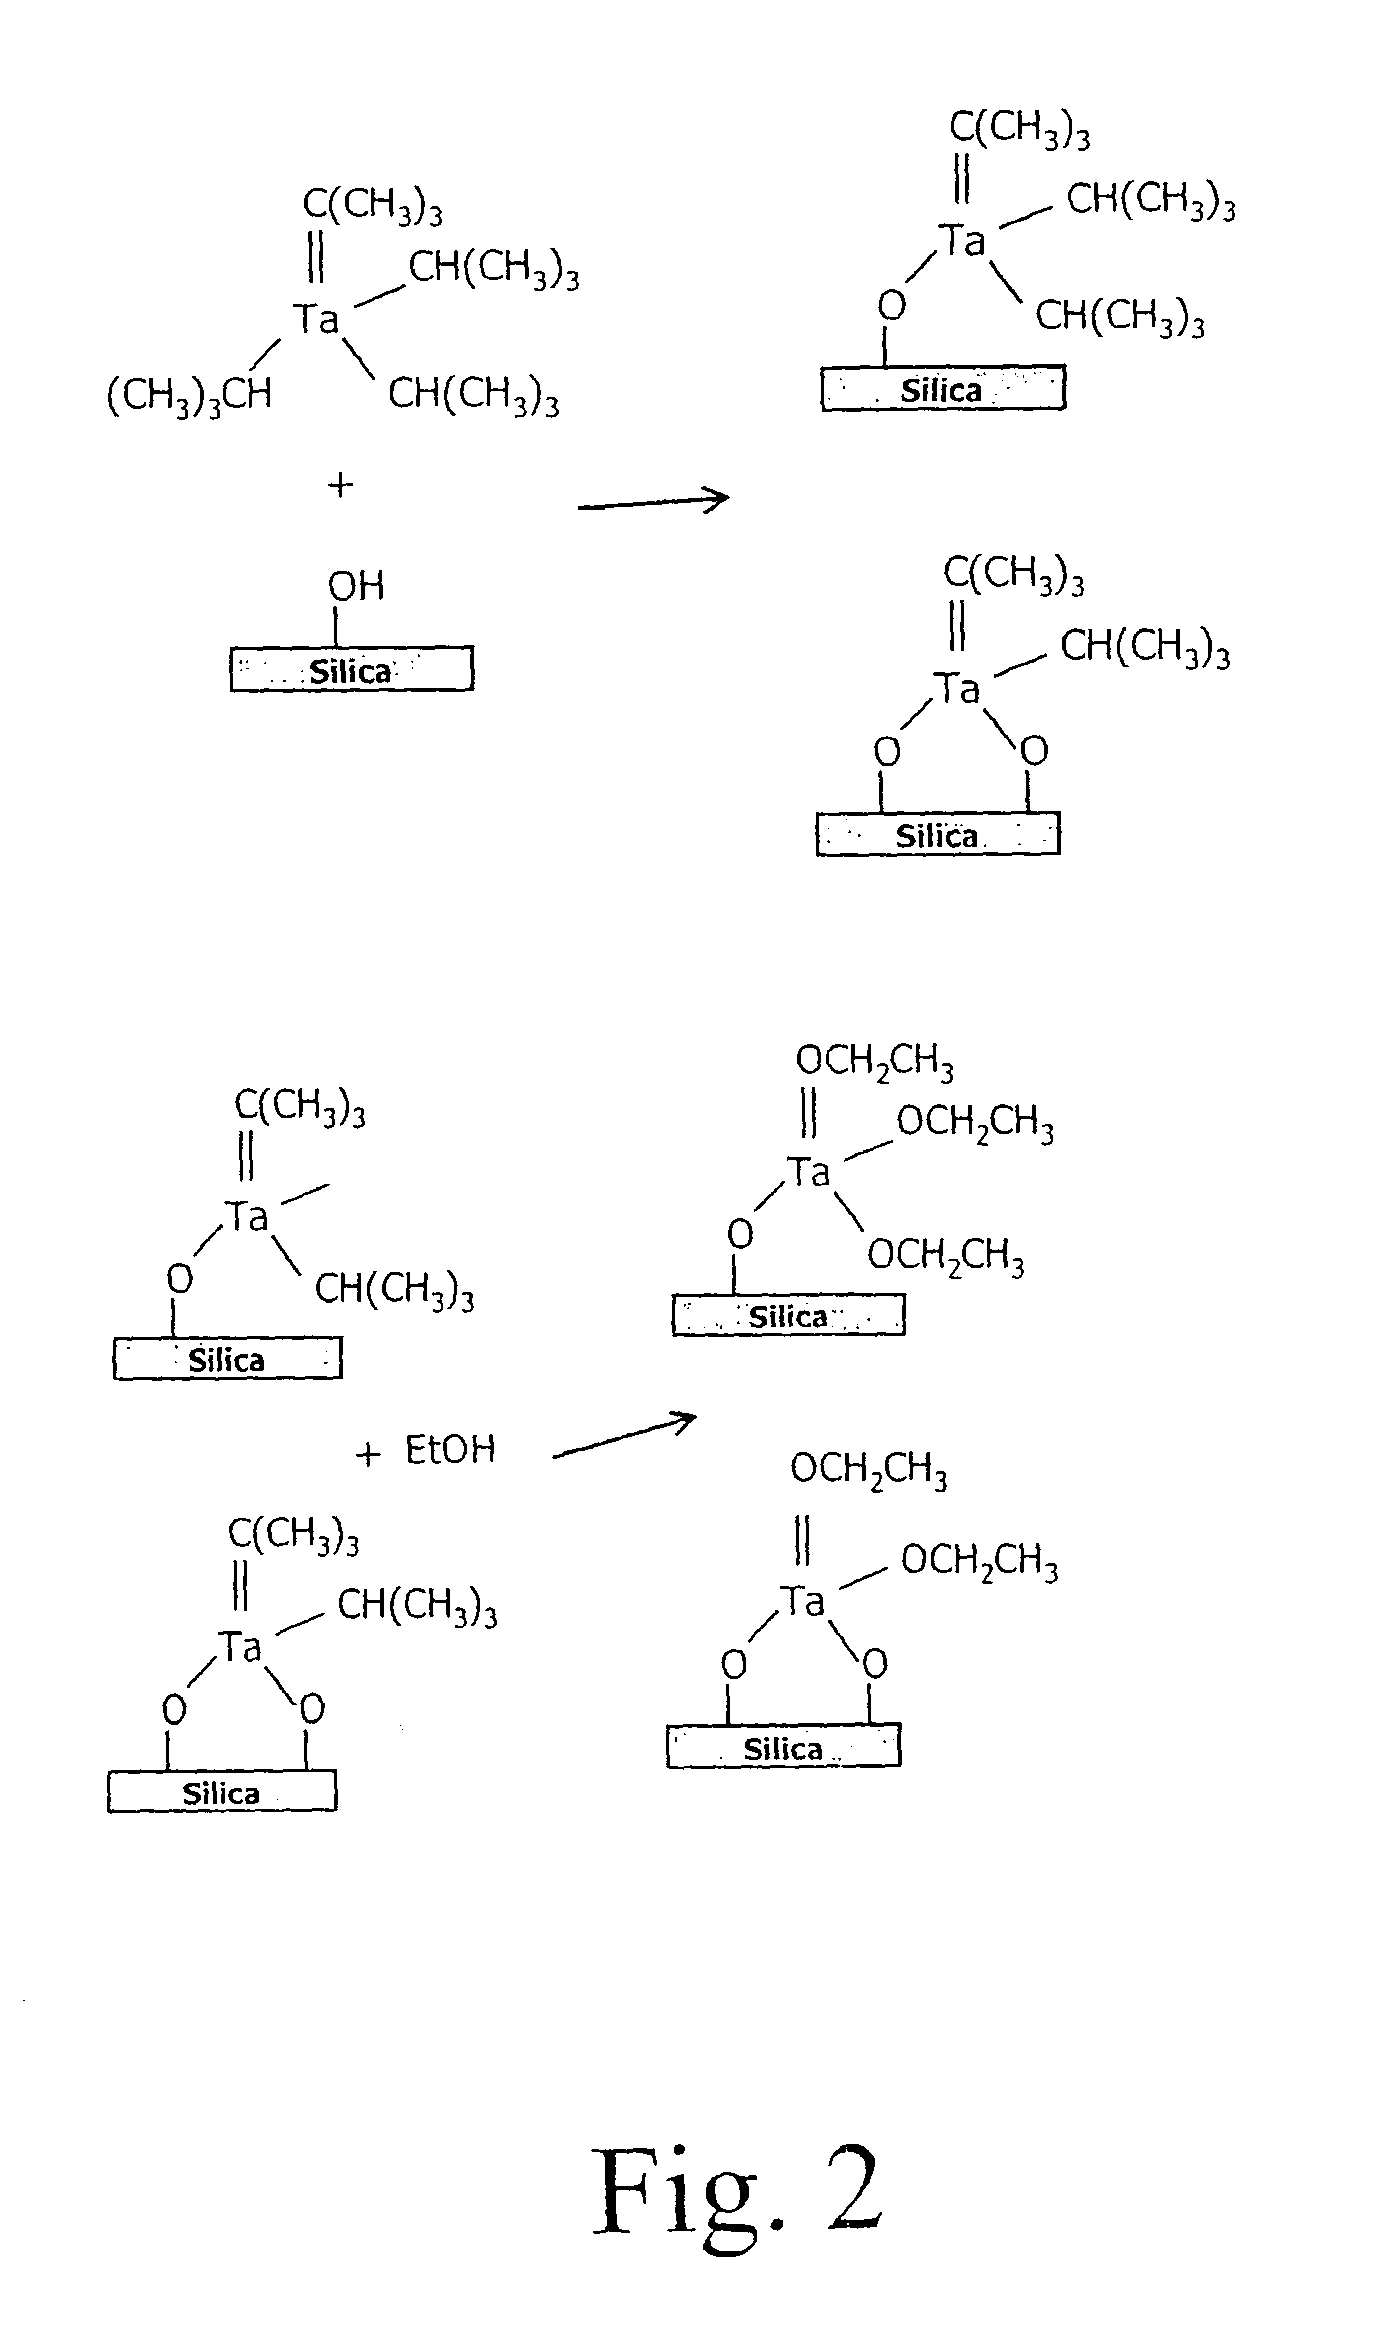 Tethered catalyst processes in microchannel reactors and systems containing a tethered catalyst or tethered chiral auxiliary